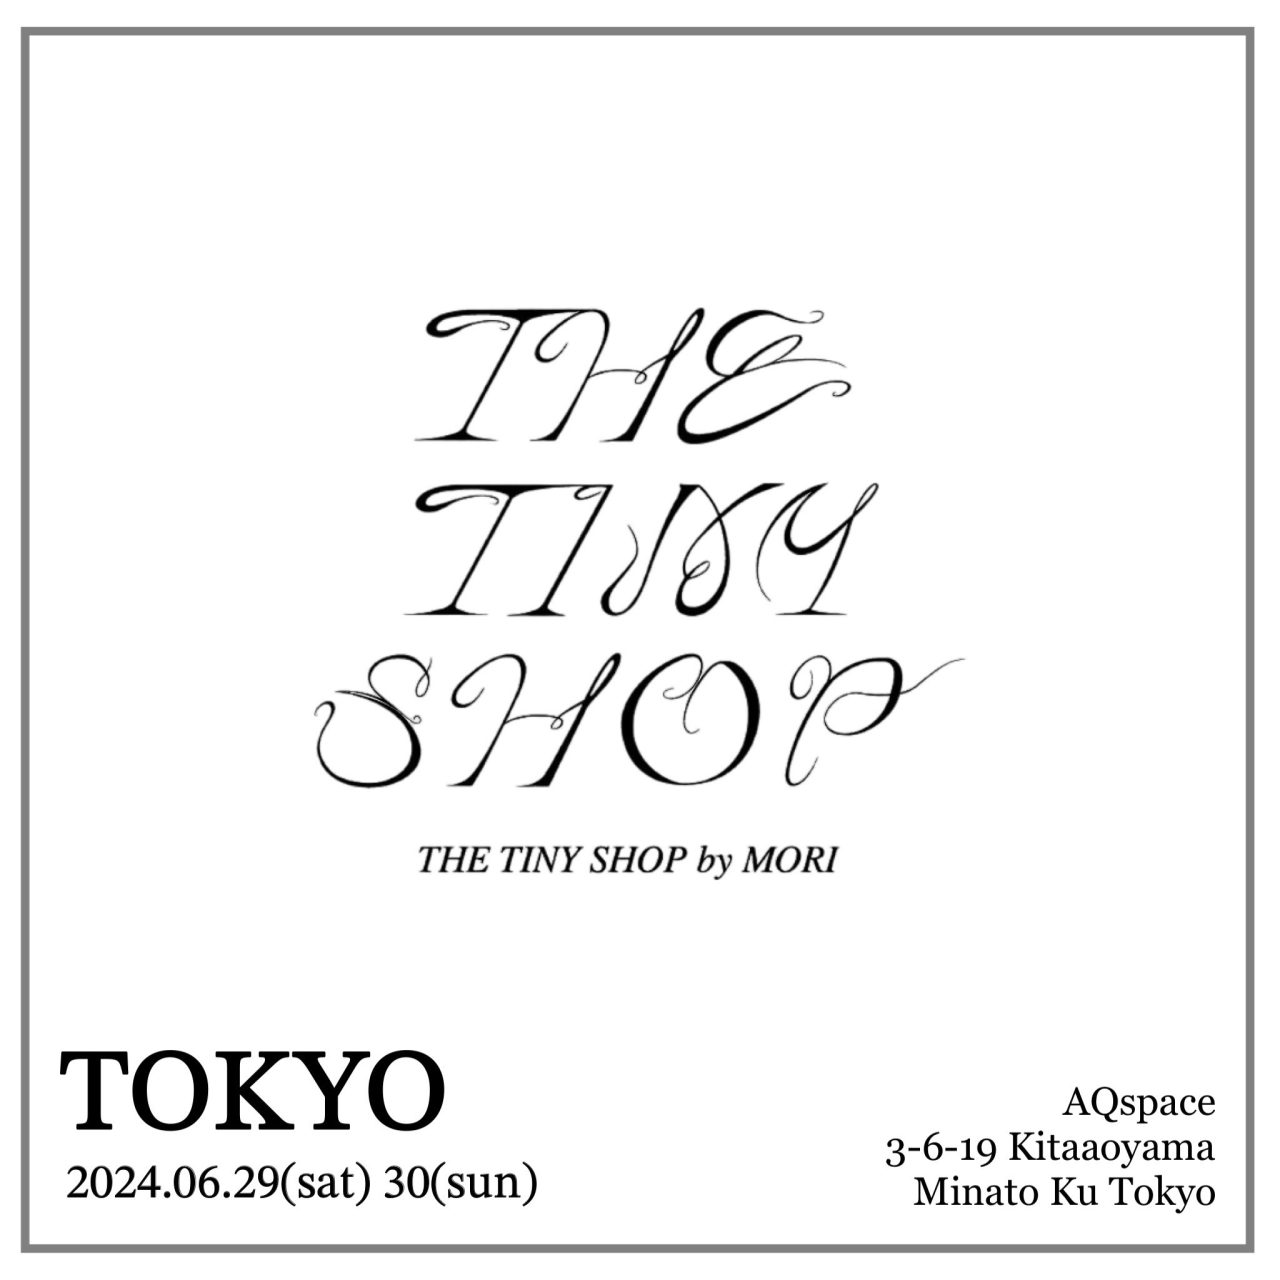 THE TINY SHOP by mori POPUP SHOP IN TOKYO